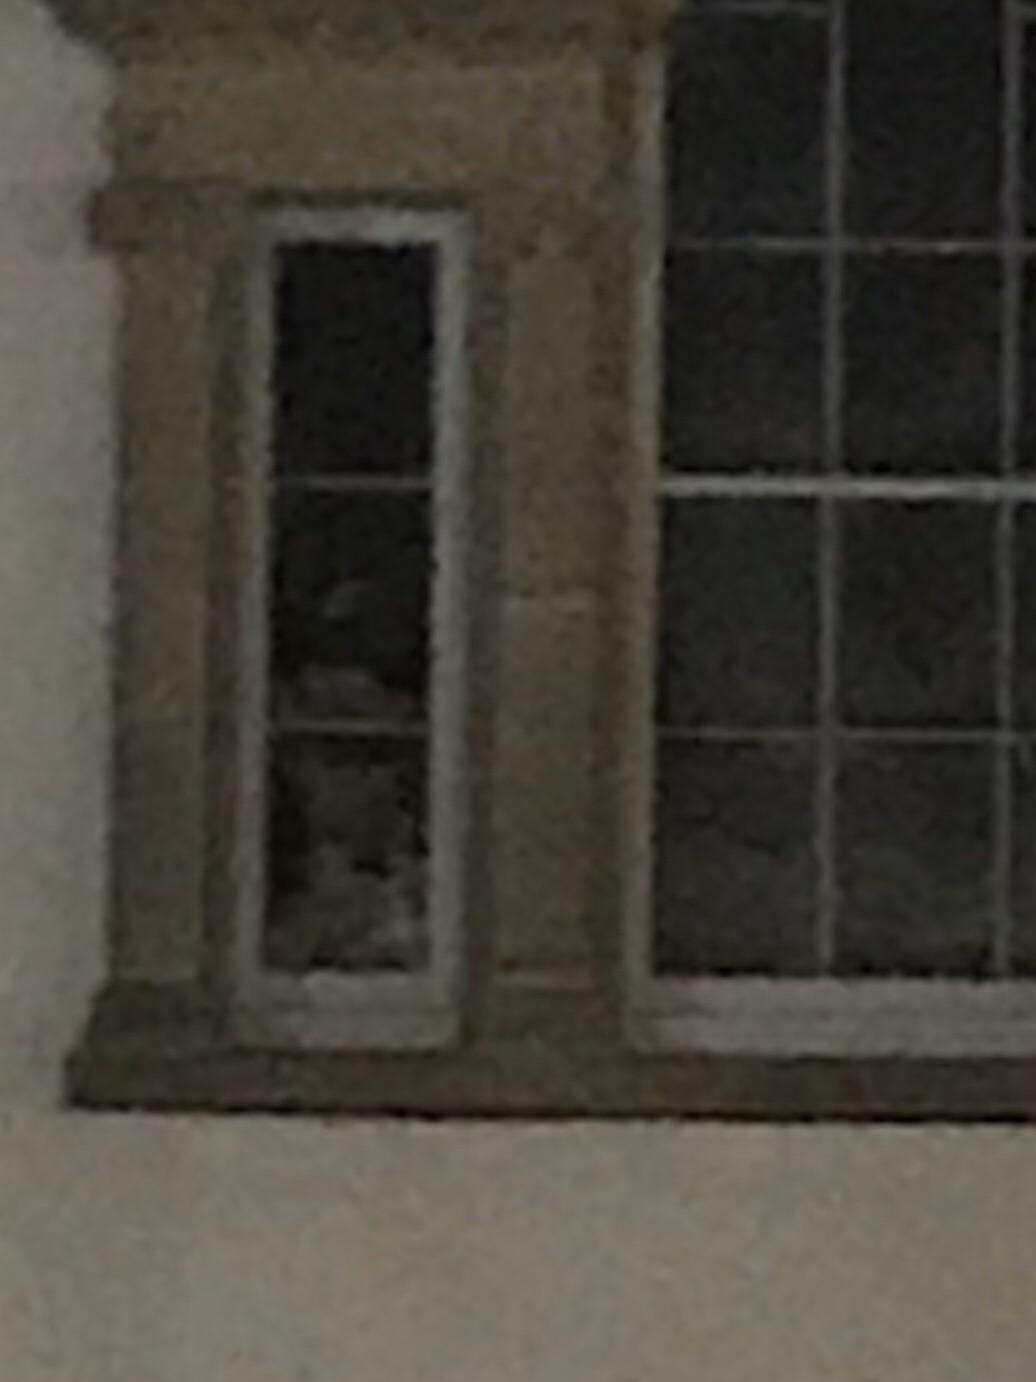 In Charleston South Carolina I was on a ghost tour, we where standing in the court yard where serial killer Lavinia fisher was hanged. I saw something peeping at us through the town hall window, this is what I caught.